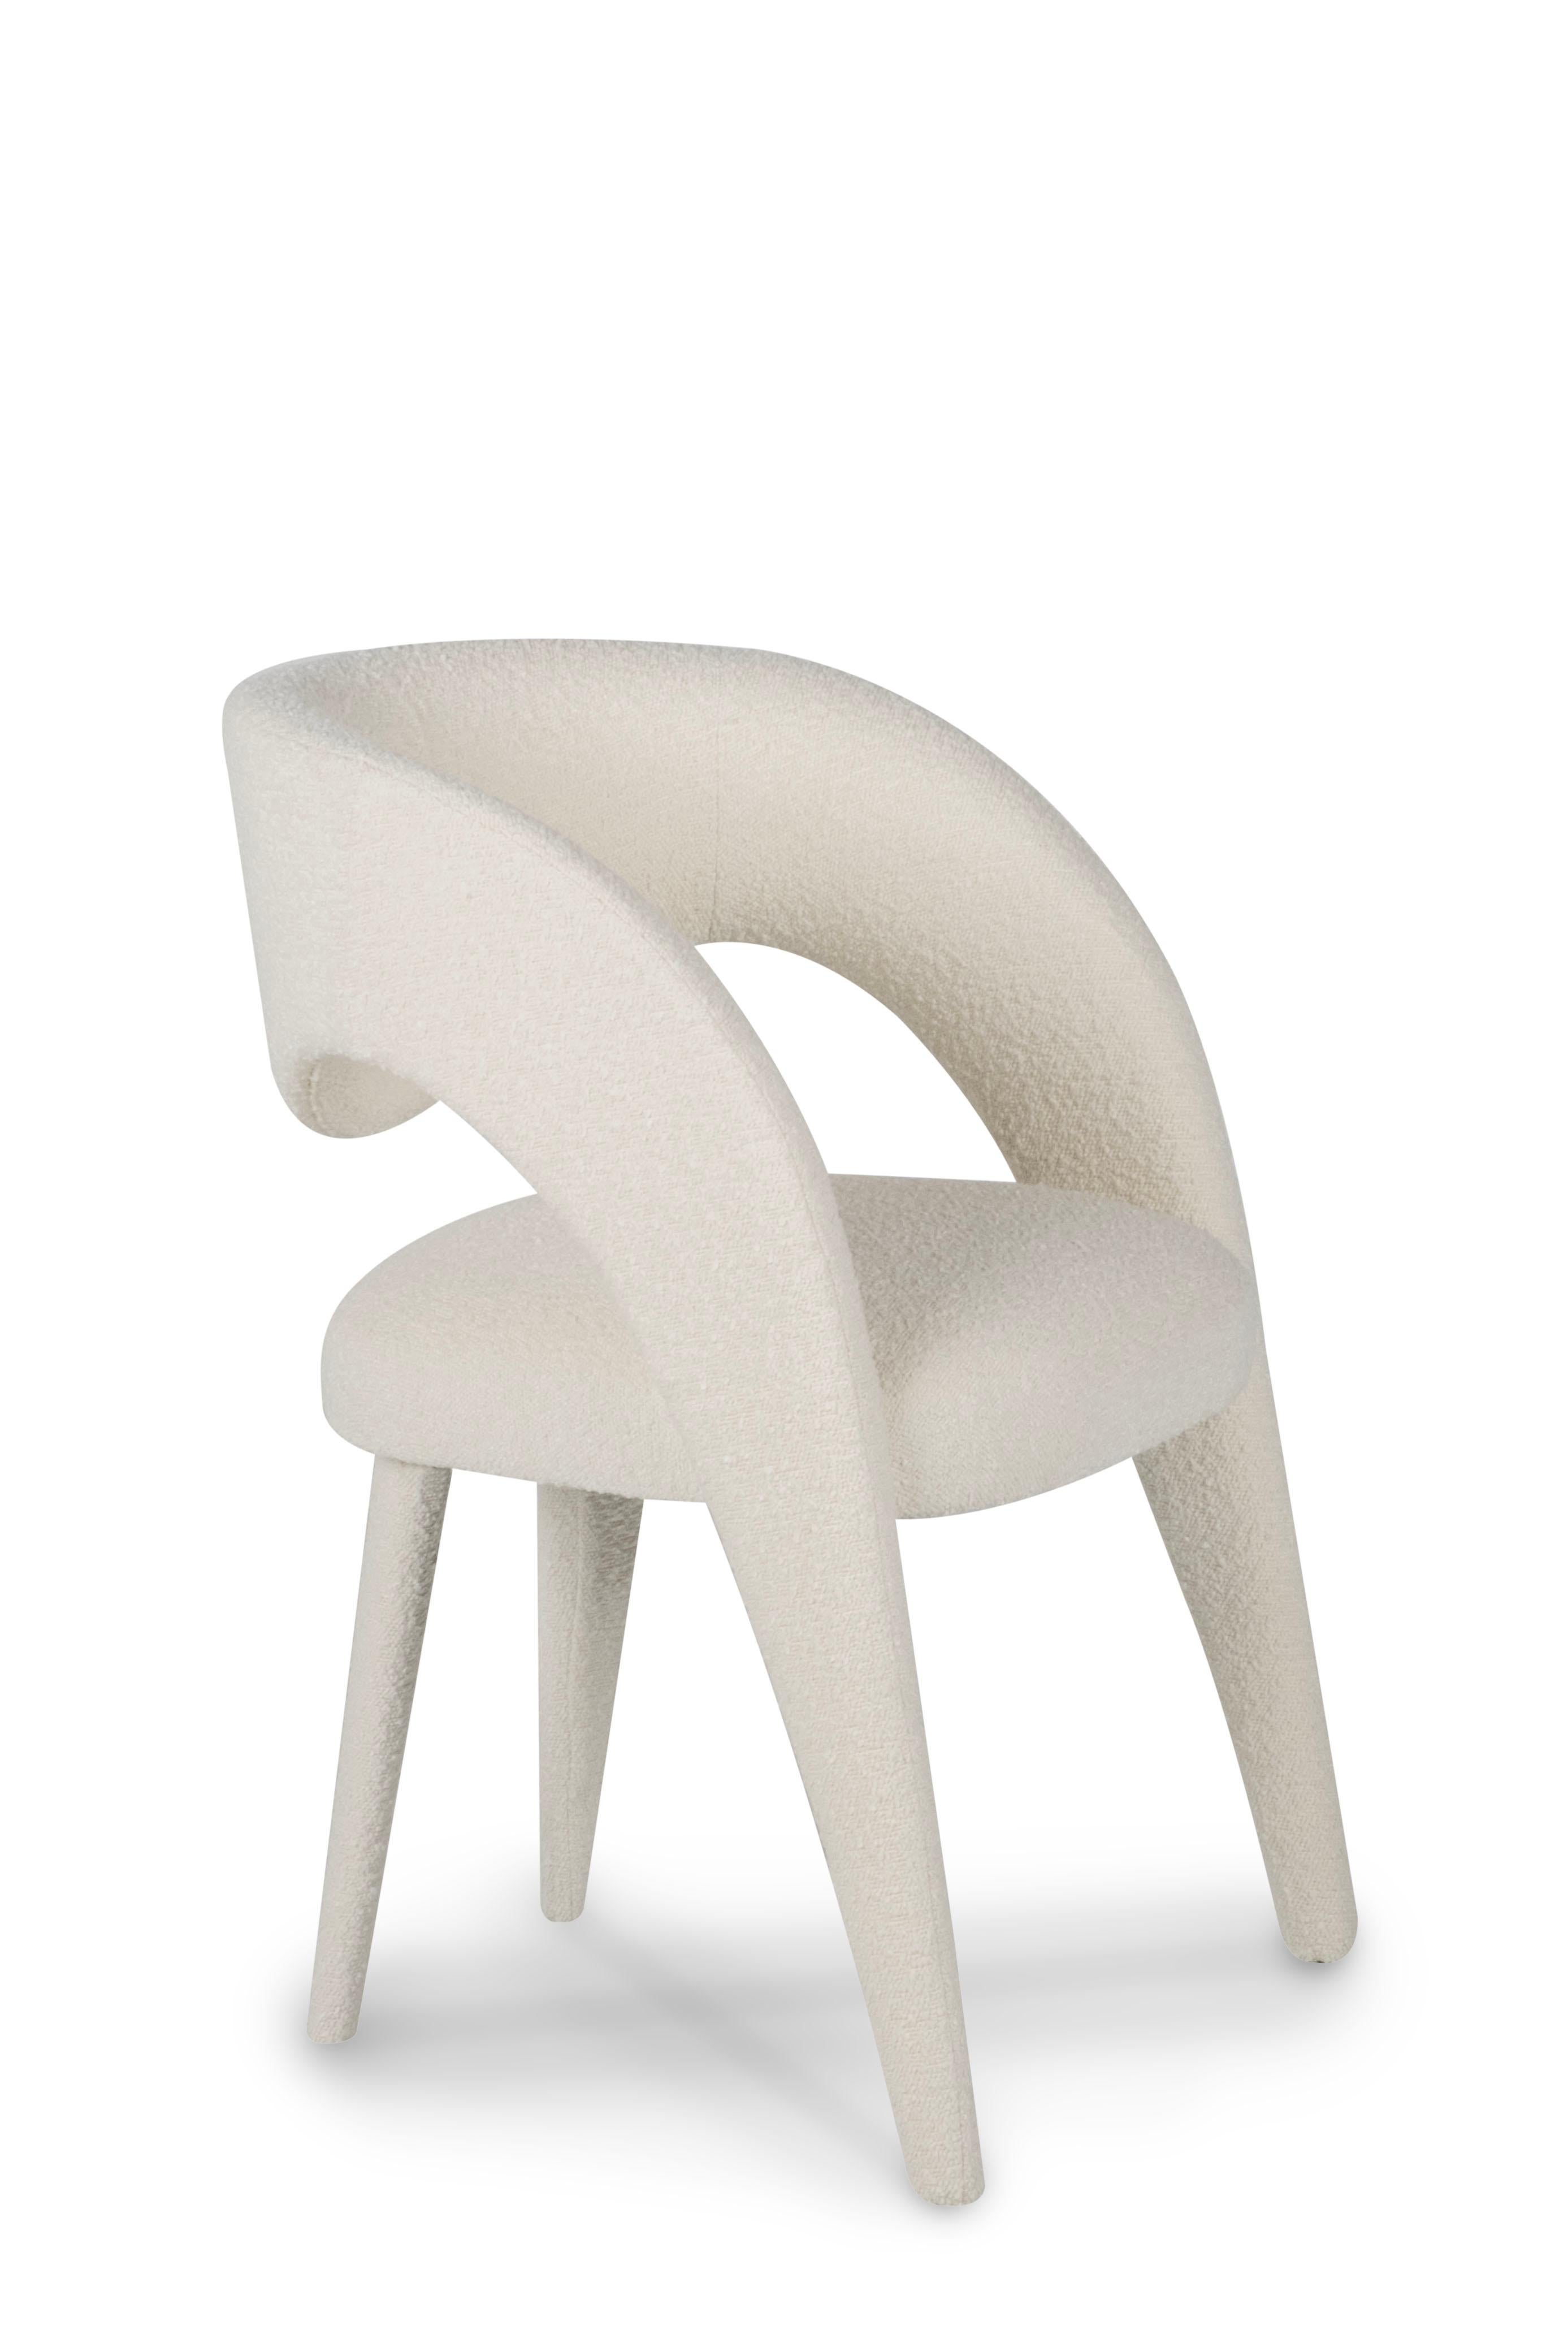 XXIe siècle et contemporain The Moderns Laurence Dining Chairs Set/6, Bouclé, Handmade in Portugal by Greenapple en vente